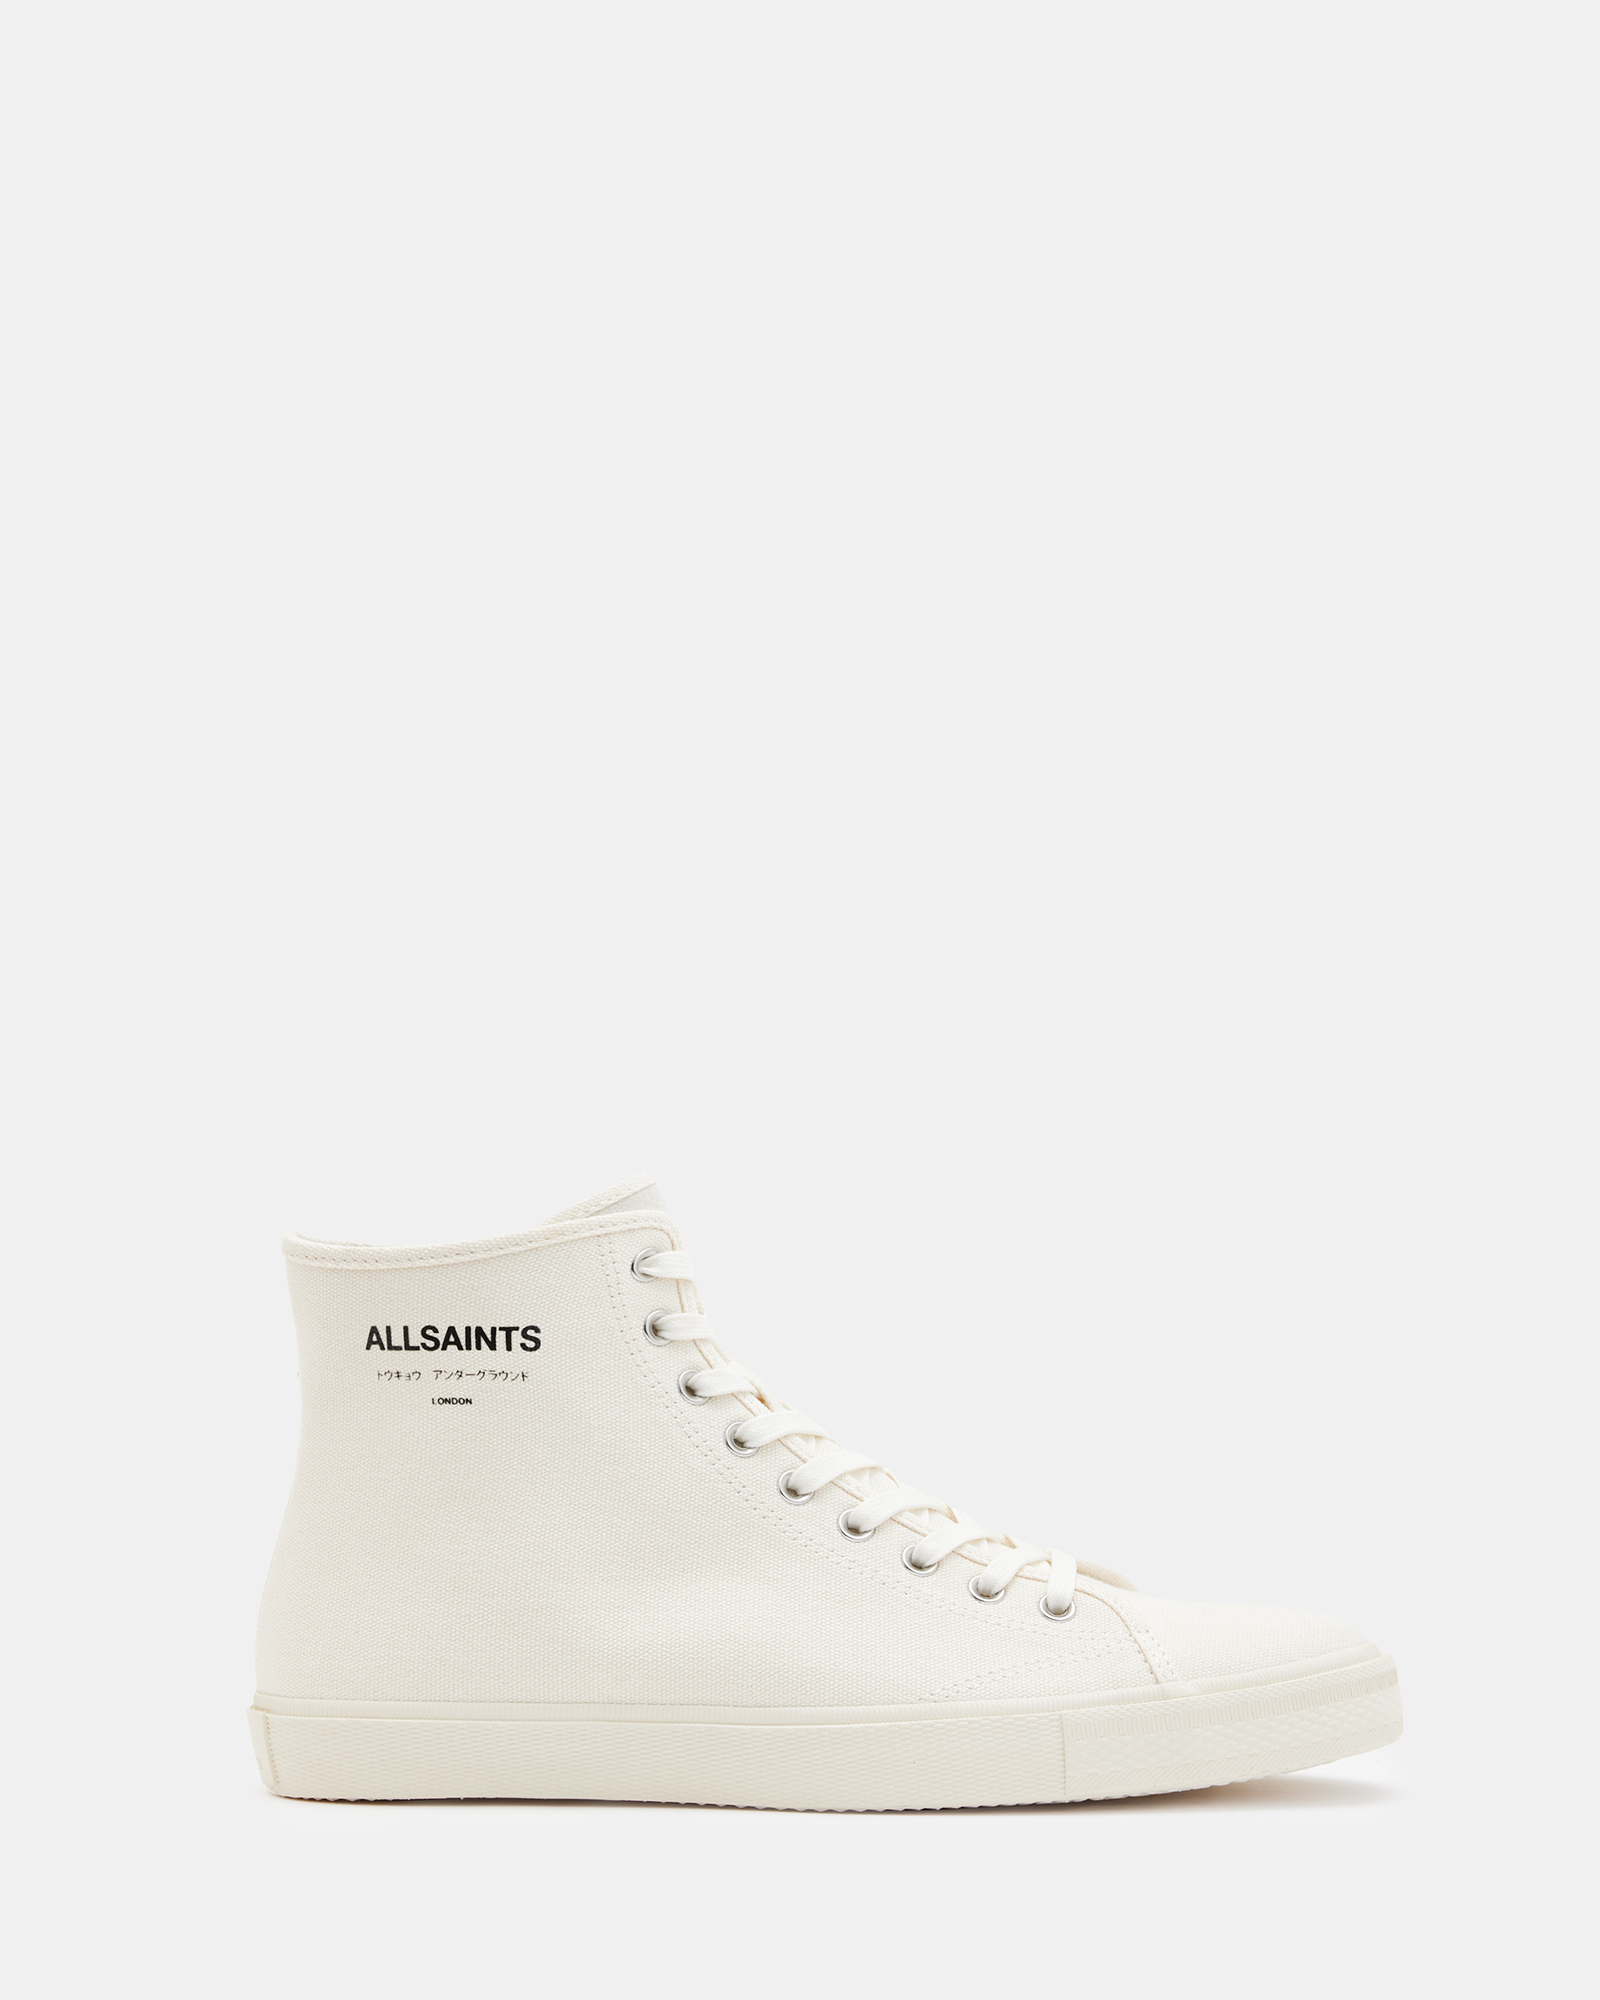 AllSaints Underground Canvas High Top Sneakers